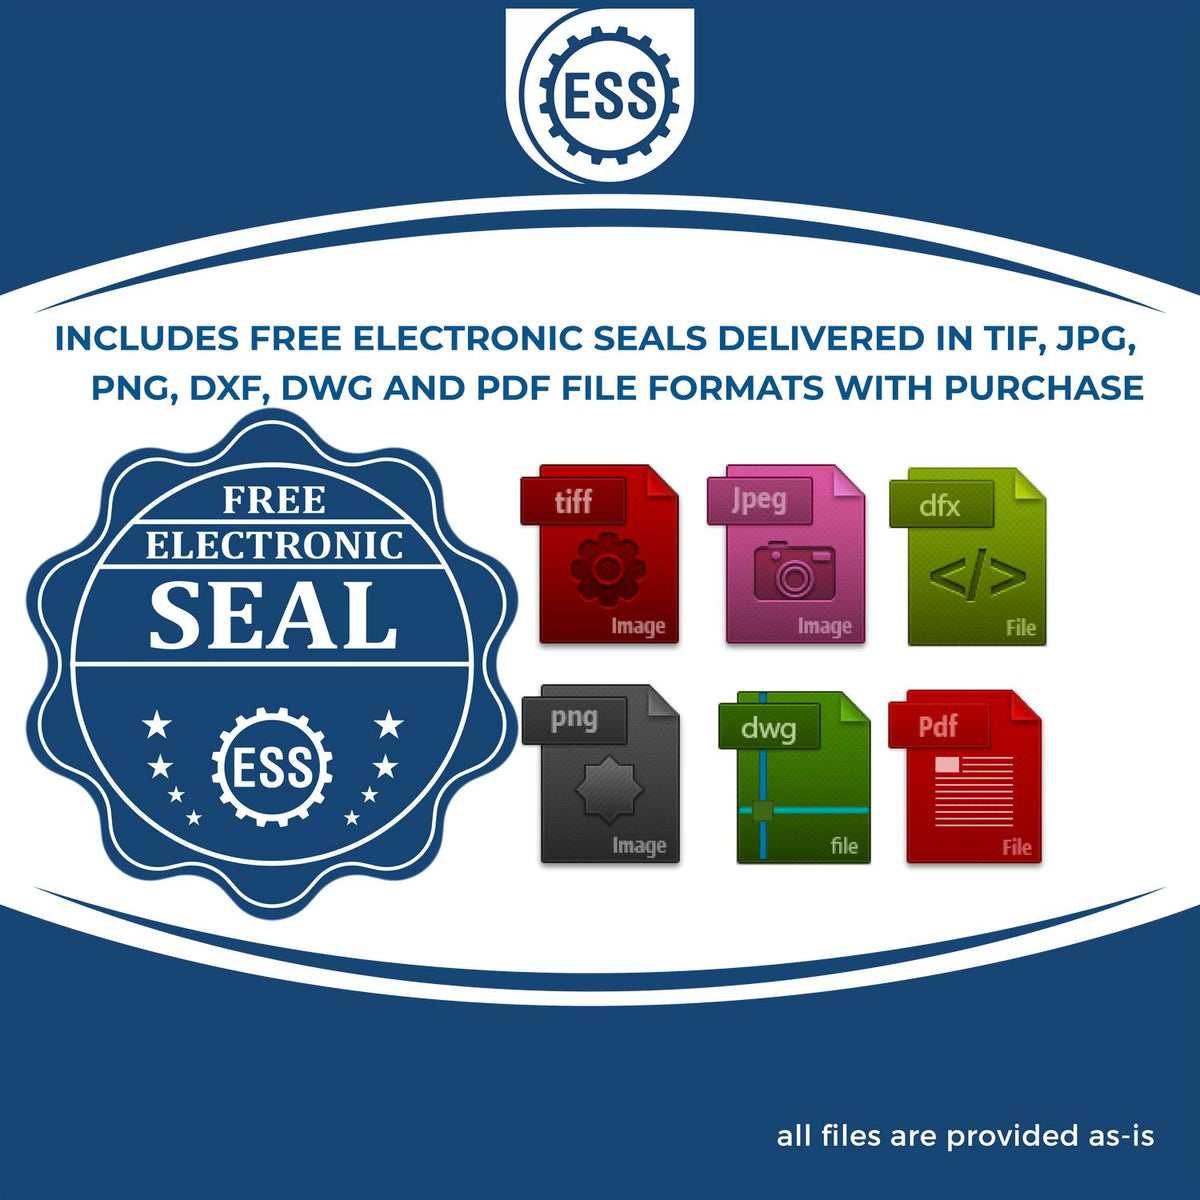 An infographic for the free electronic seal for the Slim Pre-Inked Rectangular Notary Stamp for Pennsylvania illustrating the different file type icons such as DXF, DWG, TIF, JPG and PNG.